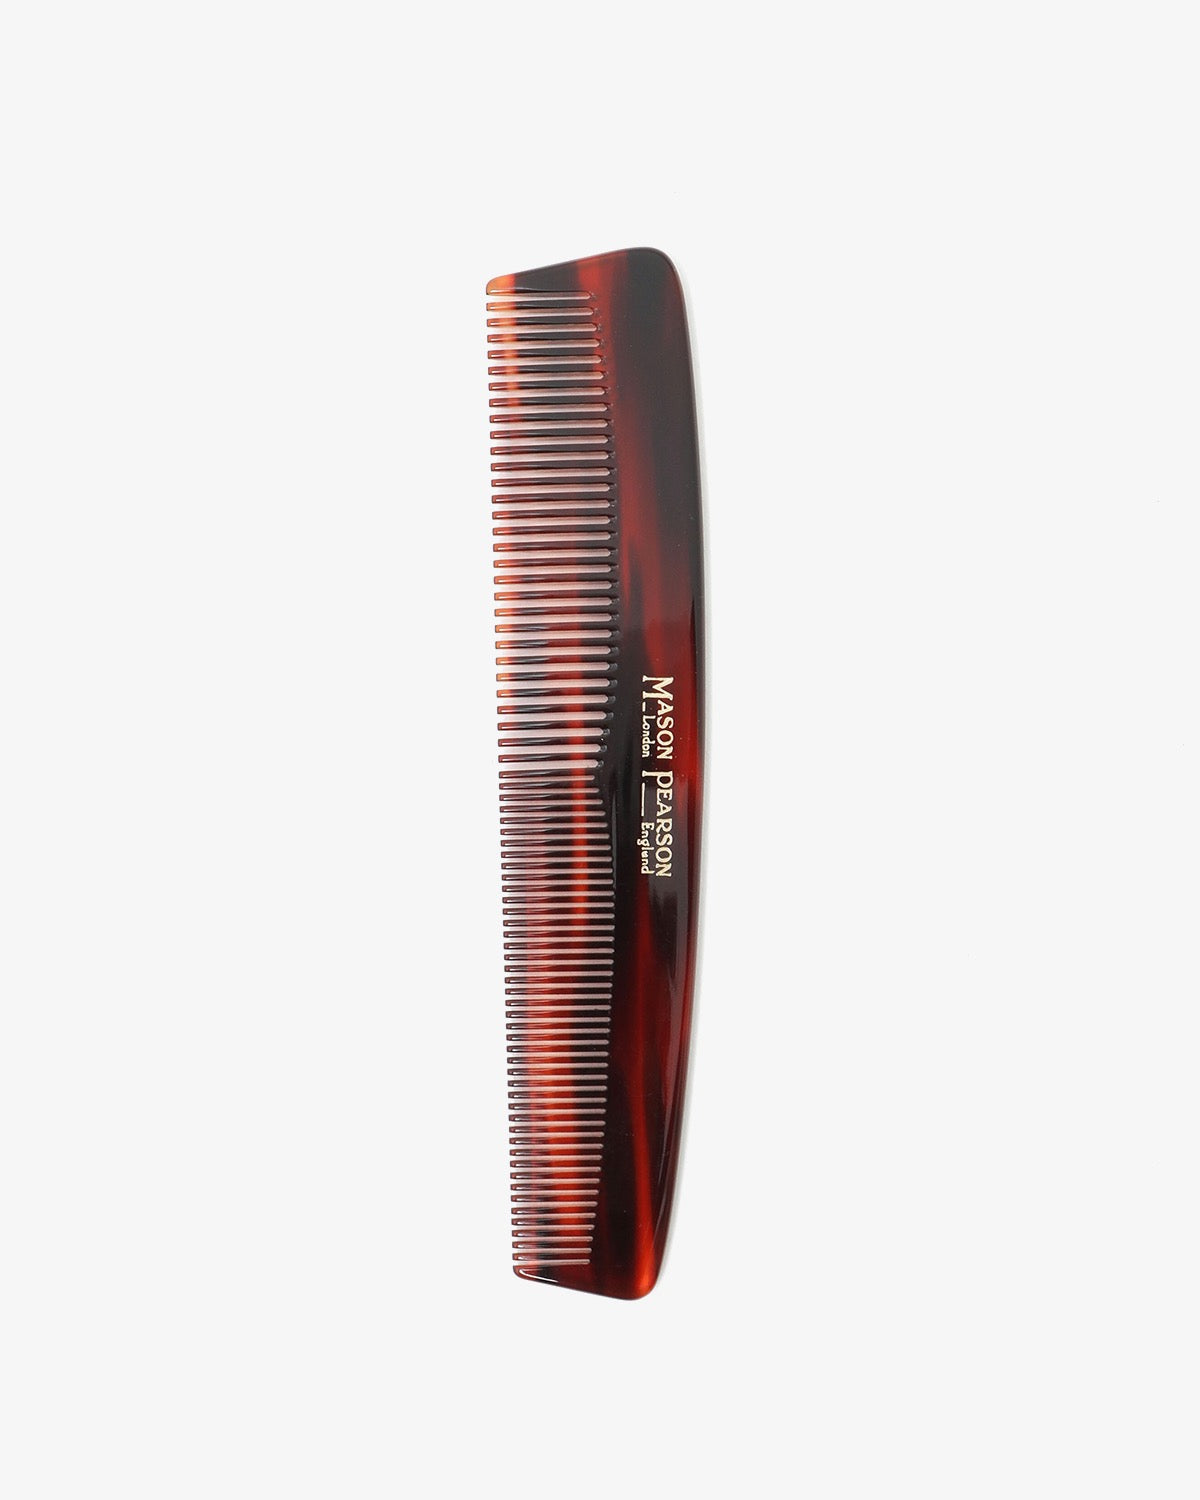 STYLING COMB